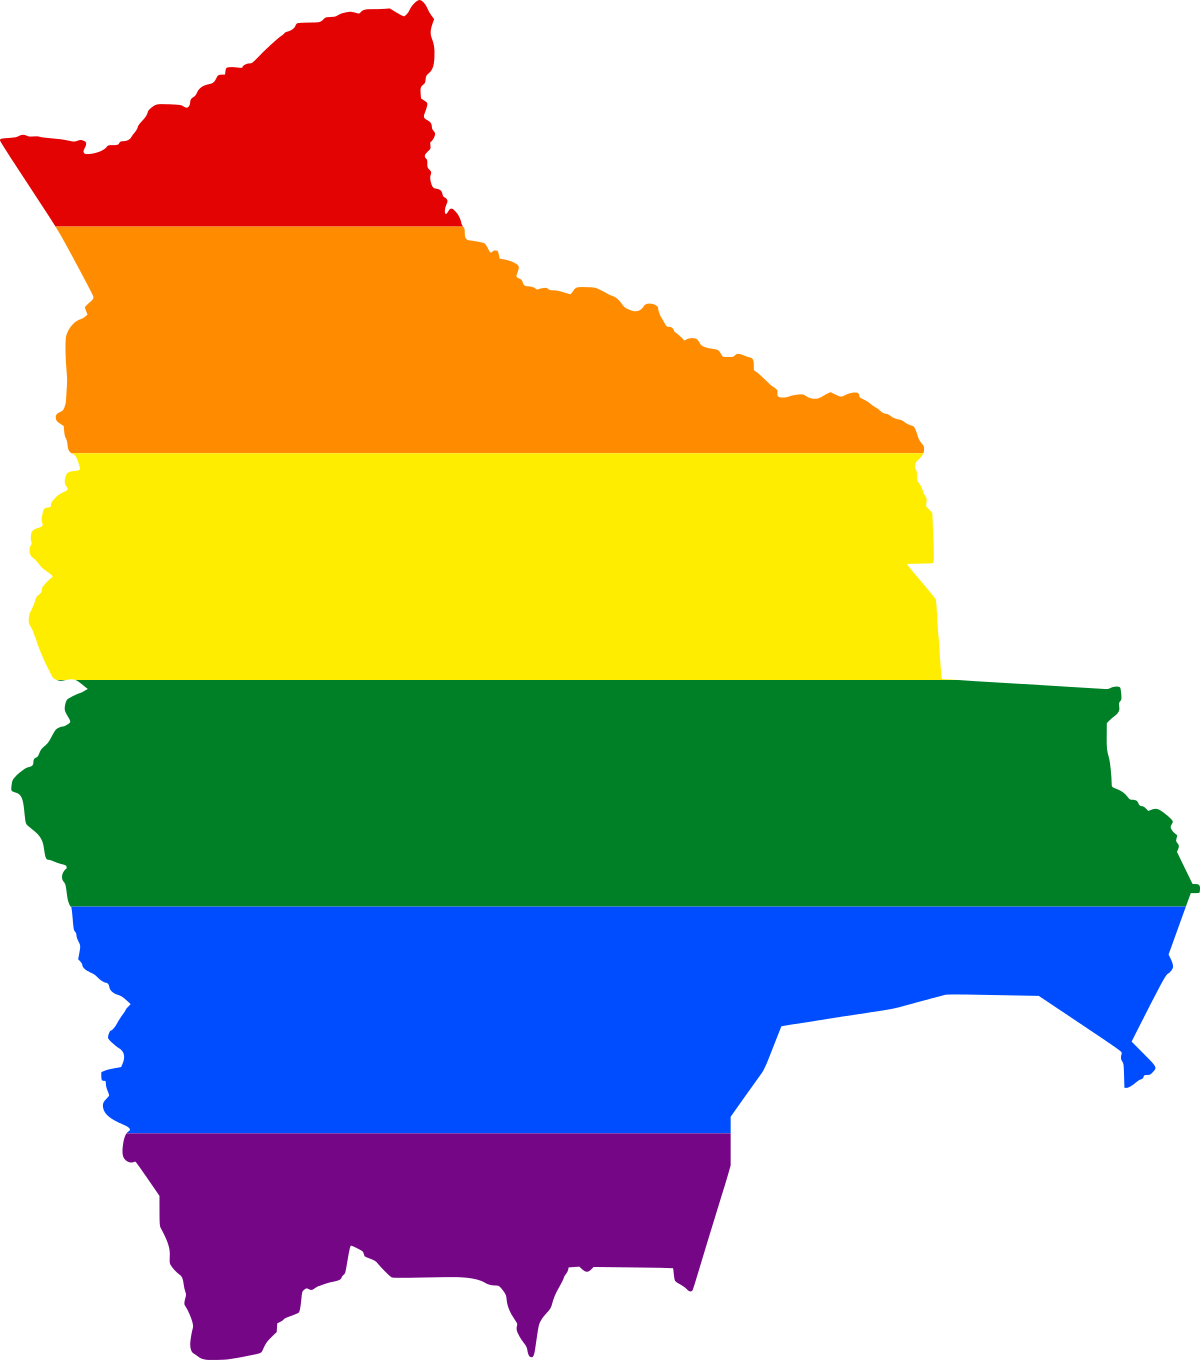 A Rainbow Colored Outline Of A State